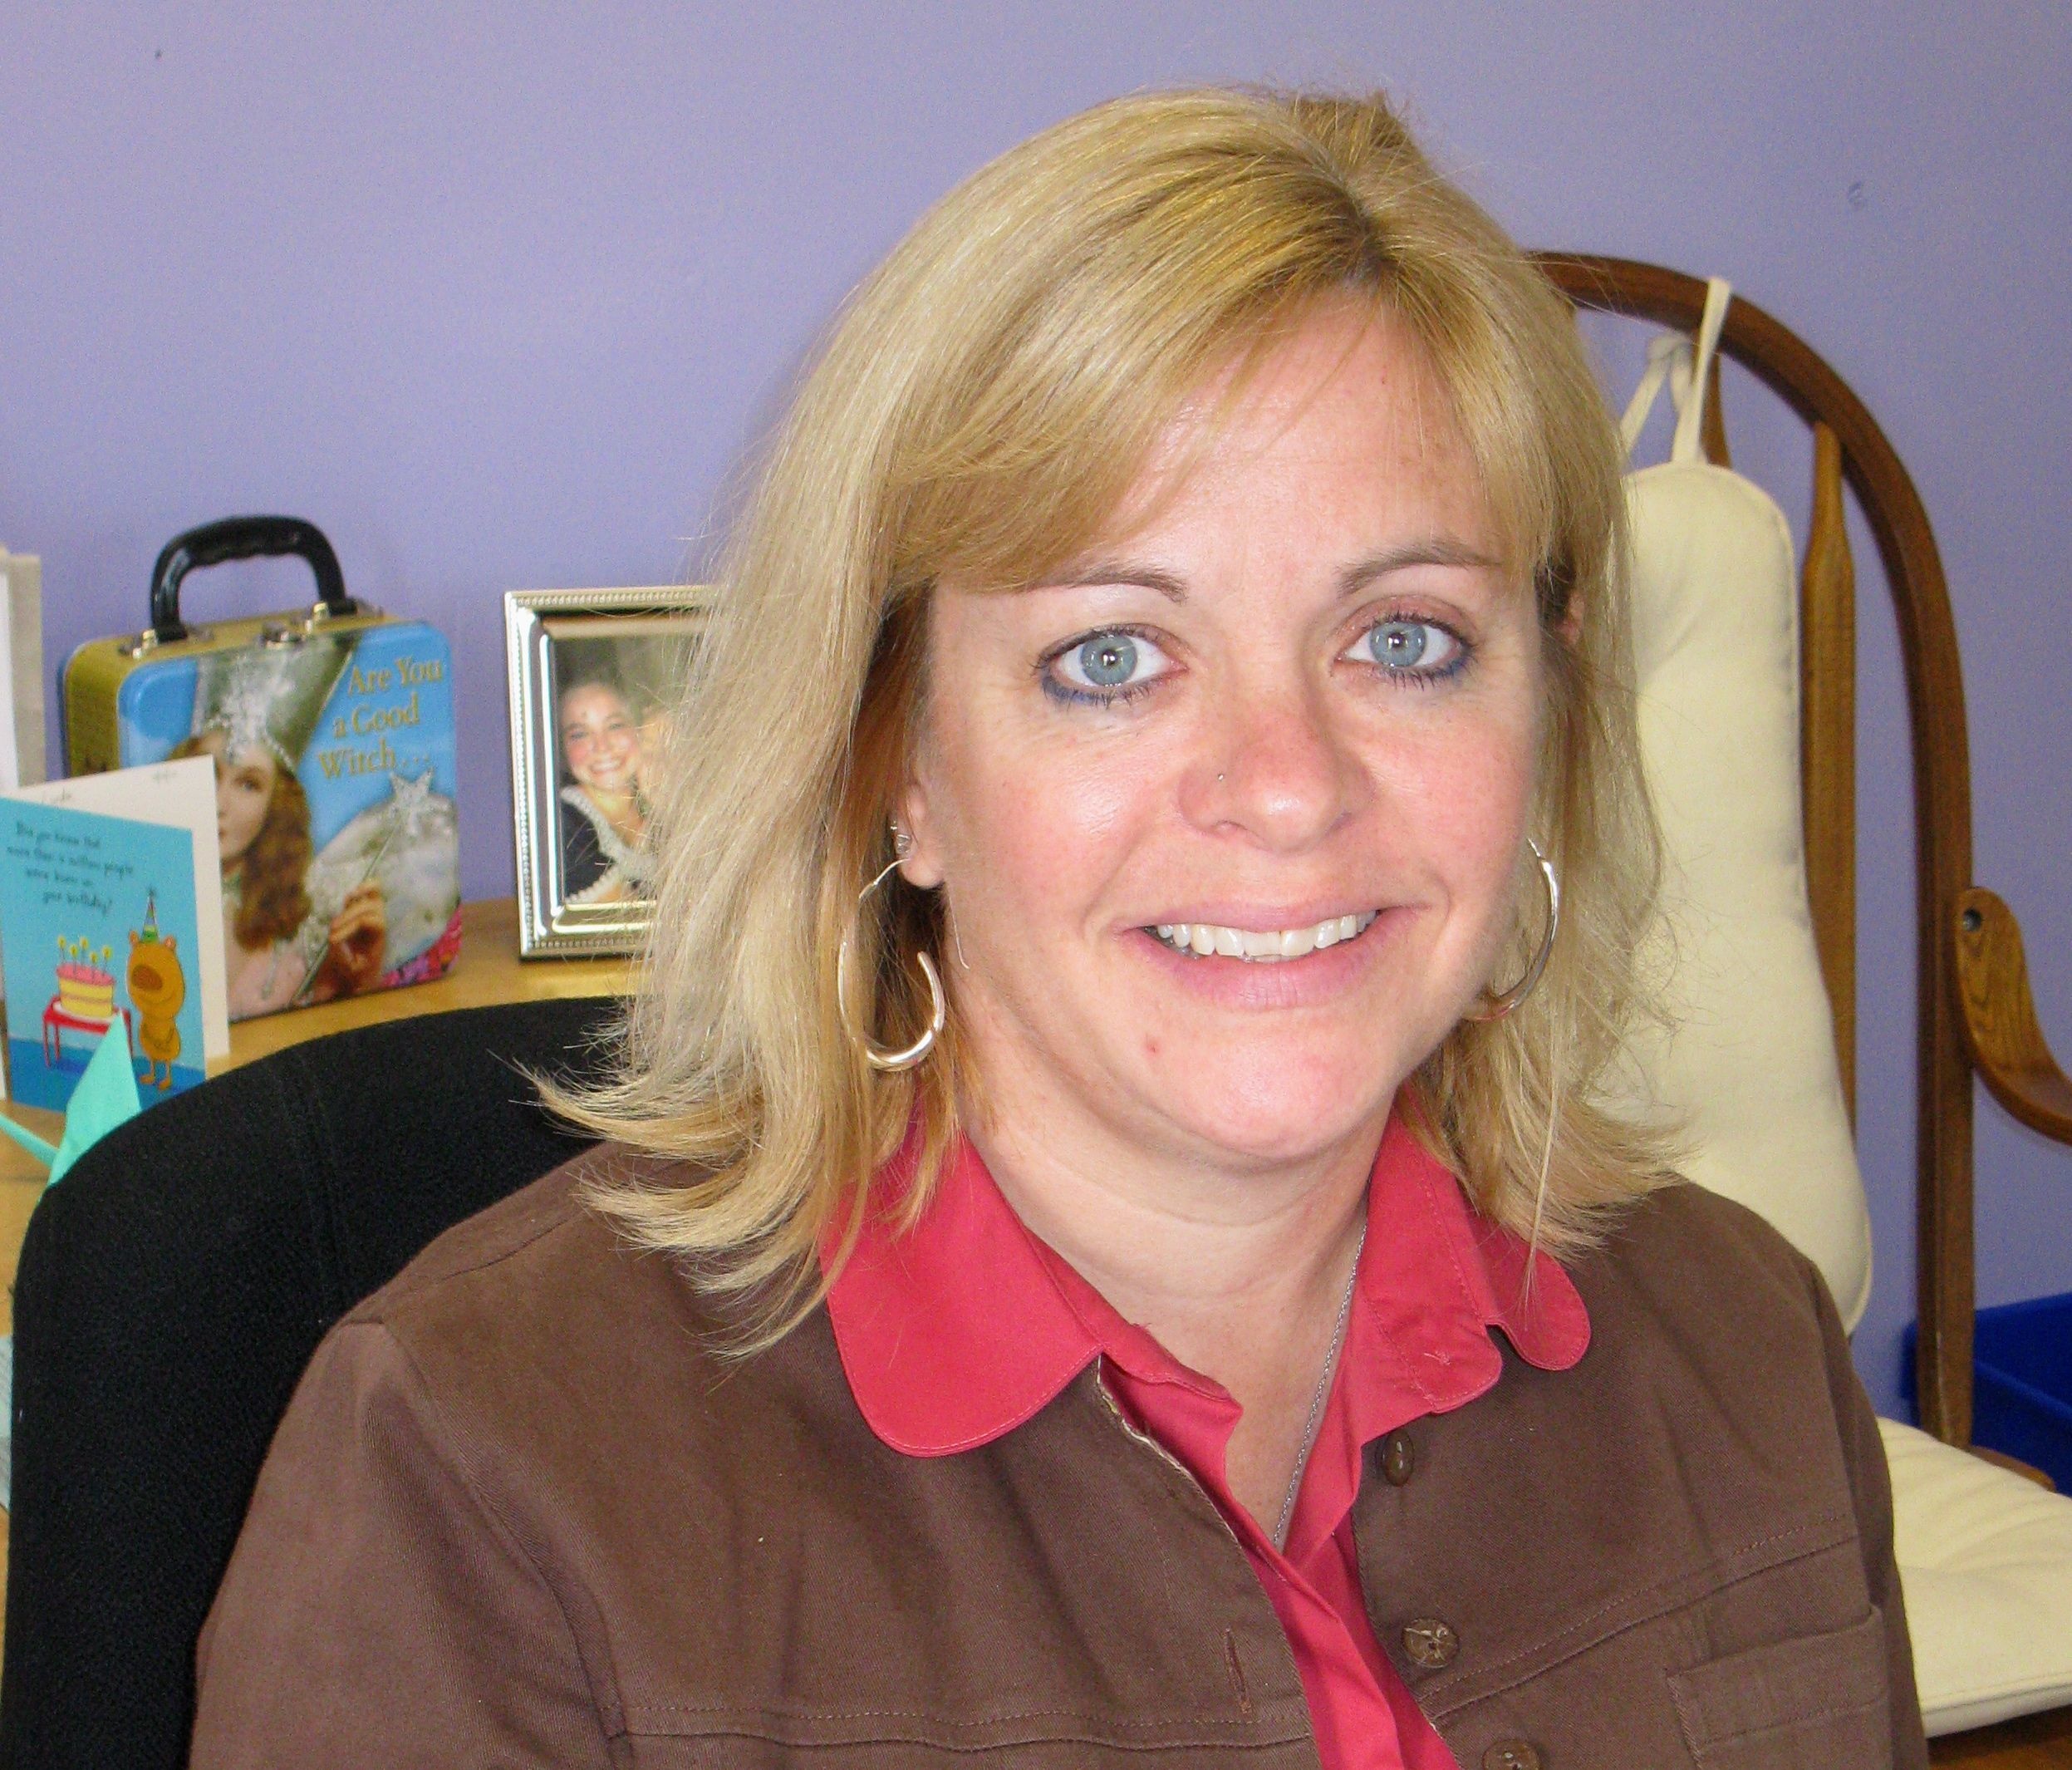 Linda Barnes has been an educator for over 25 years. She holds an M.A. in School Counseling from Goddard College. She is a Certified Guidance Counselor ... - Linda-for-Web